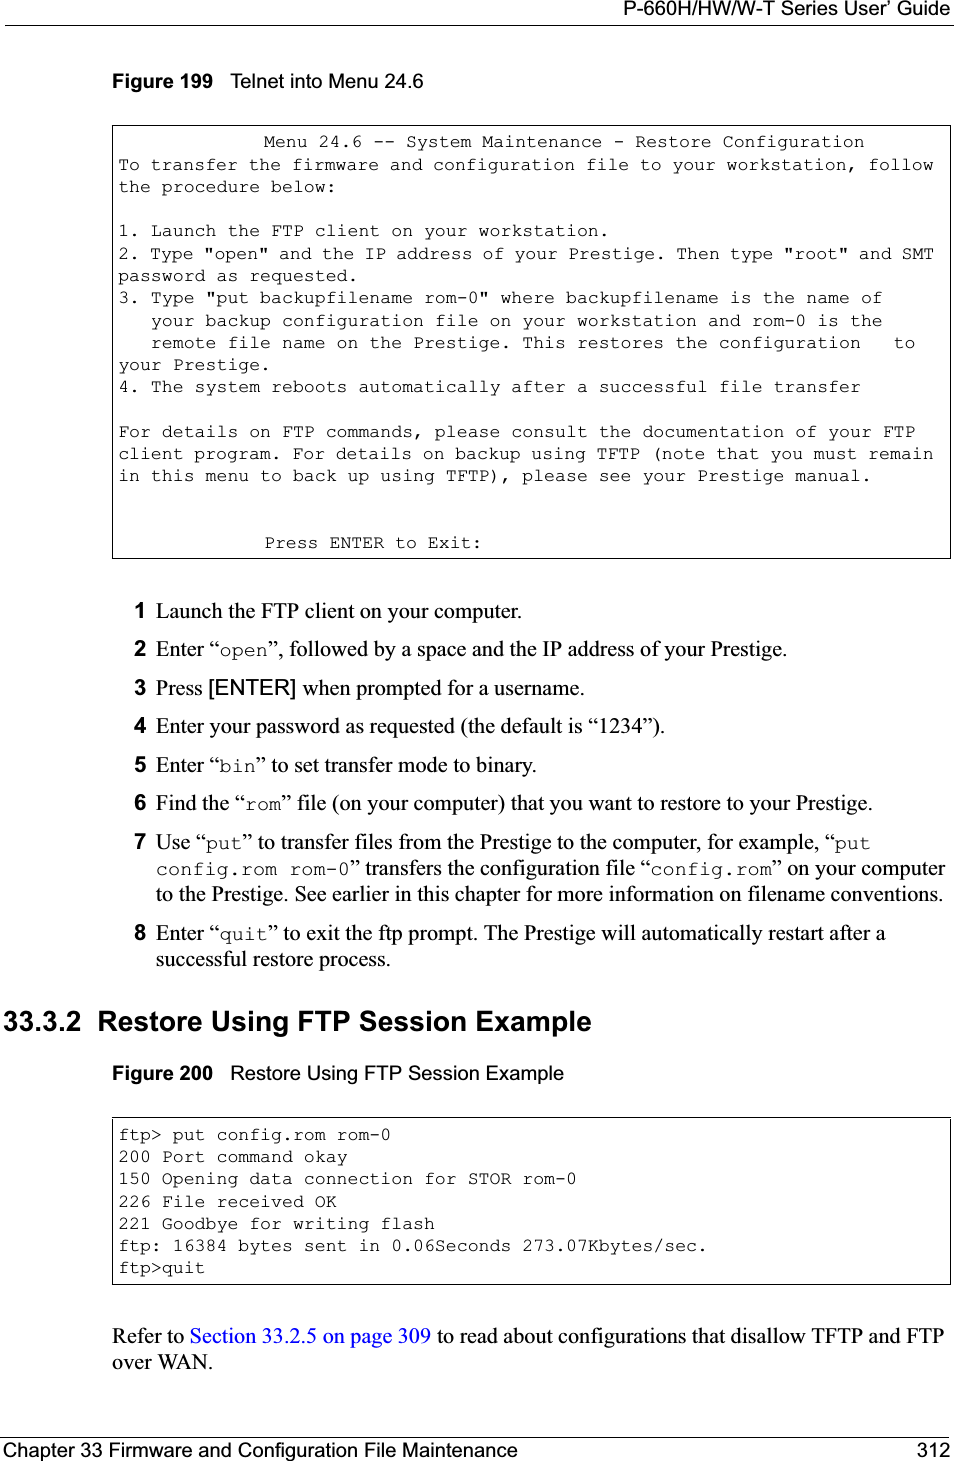 P-660H/HW/W-T Series User’ GuideChapter 33 Firmware and Configuration File Maintenance 312Figure 199   Telnet into Menu 24.61Launch the FTP client on your computer.2Enter “open”, followed by a space and the IP address of your Prestige. 3Press [ENTER] when prompted for a username.4Enter your password as requested (the default is “1234”).5Enter “bin” to set transfer mode to binary.6Find the “rom” file (on your computer) that you want to restore to your Prestige.7Use “put” to transfer files from the Prestige to the computer, for example, “putconfig.rom rom-0” transfers the configuration file “config.rom” on your computer to the Prestige. See earlier in this chapter for more information on filename conventions.8Enter “quit” to exit the ftp prompt. The Prestige will automatically restart after a successful restore process.33.3.2  Restore Using FTP Session ExampleFigure 200   Restore Using FTP Session ExampleRefer to Section 33.2.5 on page 309 to read about configurations that disallow TFTP and FTP over WAN.Menu 24.6 -- System Maintenance - Restore ConfigurationTo transfer the firmware and configuration file to your workstation, follow the procedure below:1. Launch the FTP client on your workstation.2. Type &quot;open&quot; and the IP address of your Prestige. Then type &quot;root&quot; and SMT password as requested.3. Type &quot;put backupfilename rom-0&quot; where backupfilename is the name of   your backup configuration file on your workstation and rom-0 is the   remote file name on the Prestige. This restores the configuration   to your Prestige.4. The system reboots automatically after a successful file transferFor details on FTP commands, please consult the documentation of your FTP client program. For details on backup using TFTP (note that you must remain in this menu to back up using TFTP), please see your Prestige manual.Press ENTER to Exit:ftp&gt; put config.rom rom-0200 Port command okay150 Opening data connection for STOR rom-0226 File received OK221 Goodbye for writing flashftp: 16384 bytes sent in 0.06Seconds 273.07Kbytes/sec.ftp&gt;quit